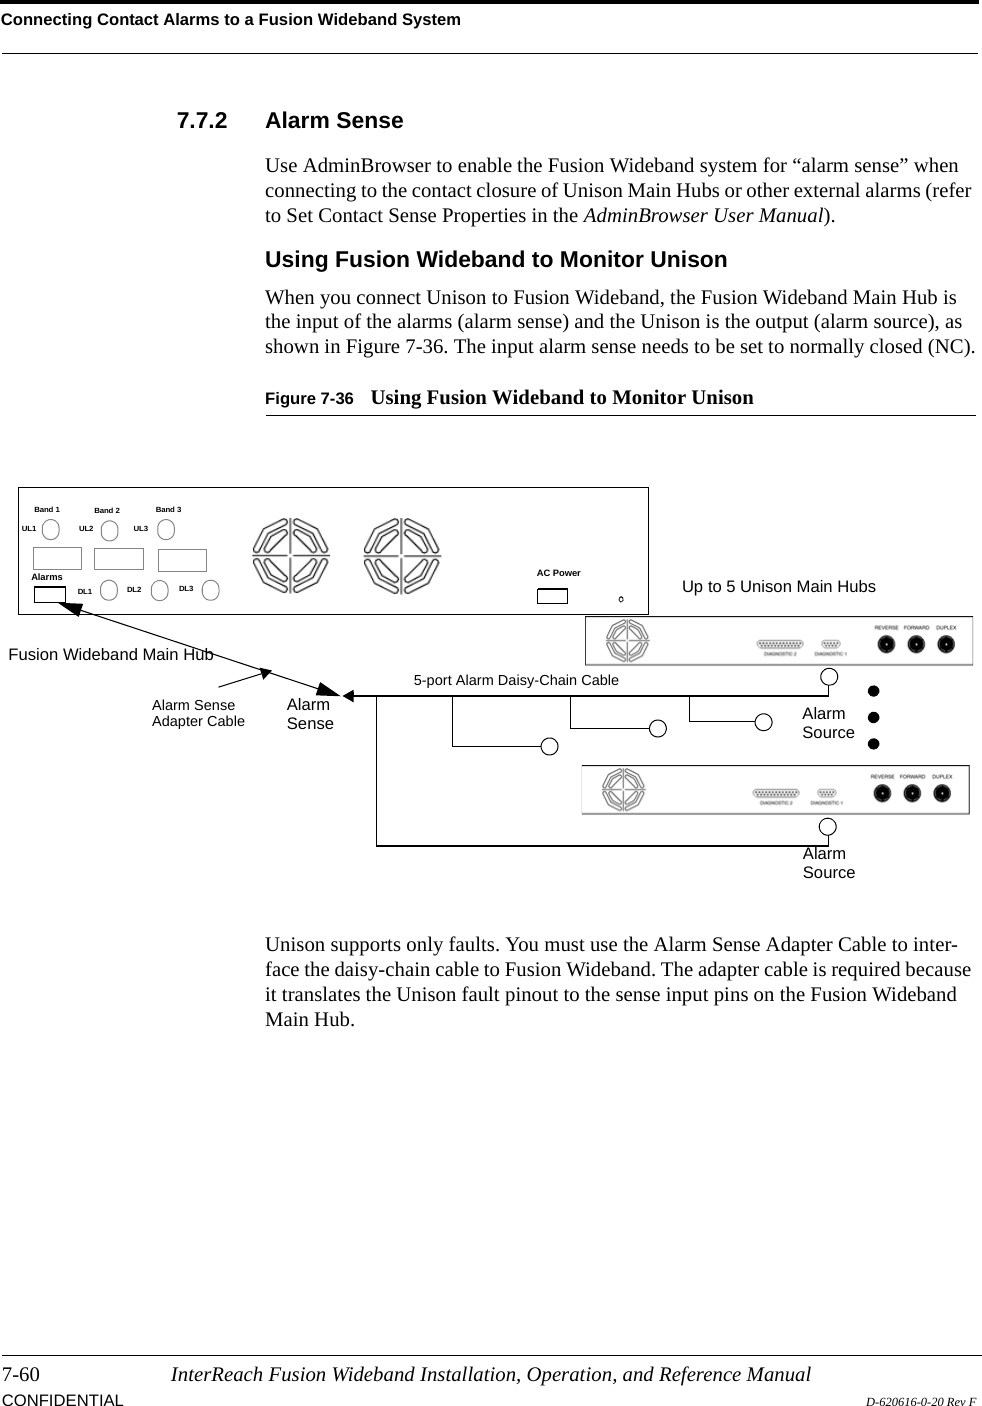 Connecting Contact Alarms to a Fusion Wideband System7-60 InterReach Fusion Wideband Installation, Operation, and Reference ManualCONFIDENTIAL D-620616-0-20 Rev F7.7.2 Alarm SenseUse AdminBrowser to enable the Fusion Wideband system for “alarm sense” when connecting to the contact closure of Unison Main Hubs or other external alarms (refer to Set Contact Sense Properties in the AdminBrowser User Manual).Using Fusion Wideband to Monitor UnisonWhen you connect Unison to Fusion Wideband, the Fusion Wideband Main Hub is the input of the alarms (alarm sense) and the Unison is the output (alarm source), as shown in Figure 7-36. The input alarm sense needs to be set to normally closed (NC).Figure 7-36 Using Fusion Wideband to Monitor UnisonUnison supports only faults. You must use the Alarm Sense Adapter Cable to inter-face the daisy-chain cable to Fusion Wideband. The adapter cable is required because it translates the Unison fault pinout to the sense input pins on the Fusion Wideband Main Hub.Up to 5 Unison Main HubsFusion Wideband Main HubAlarmSourceAlarmSense AlarmSourceAlarm SenseAdapter Cable5-port Alarm Daisy-Chain CableBand 1 Band 2 Band 3UL1 UL2 UL3DL1 DL2 DL3AC PowerAlarms